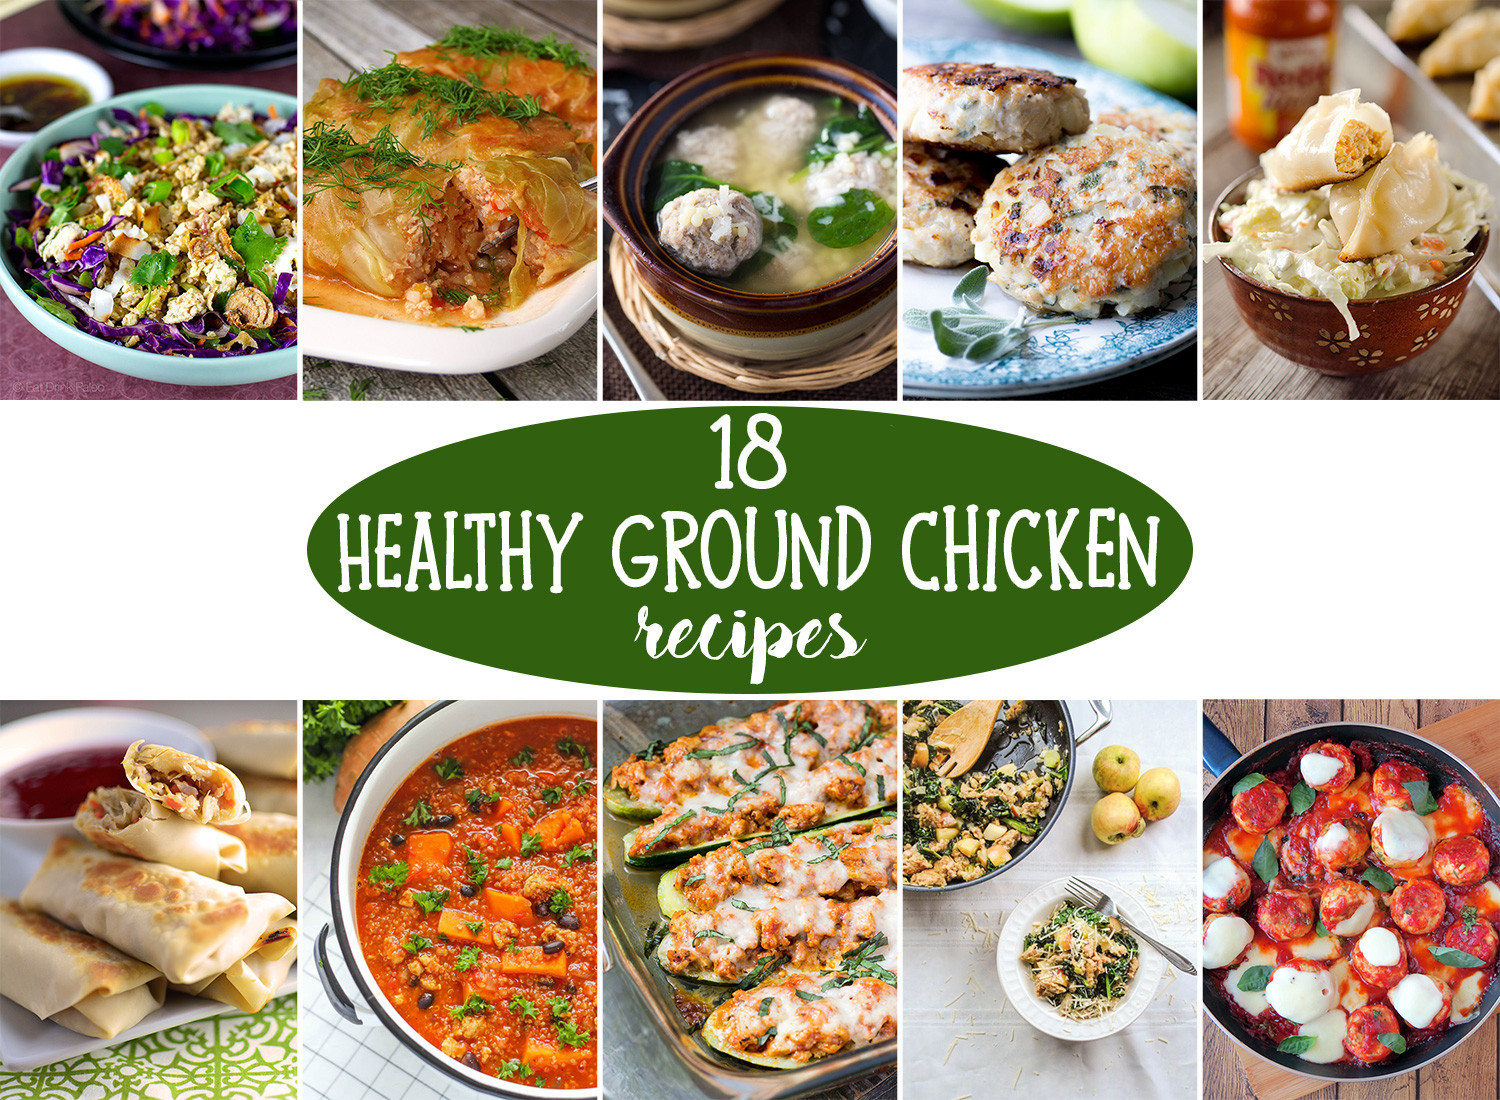 Ground Chicken Recipes Healthy
 18 Healthy Ground Chicken Recipes That ll Make You Feel Great